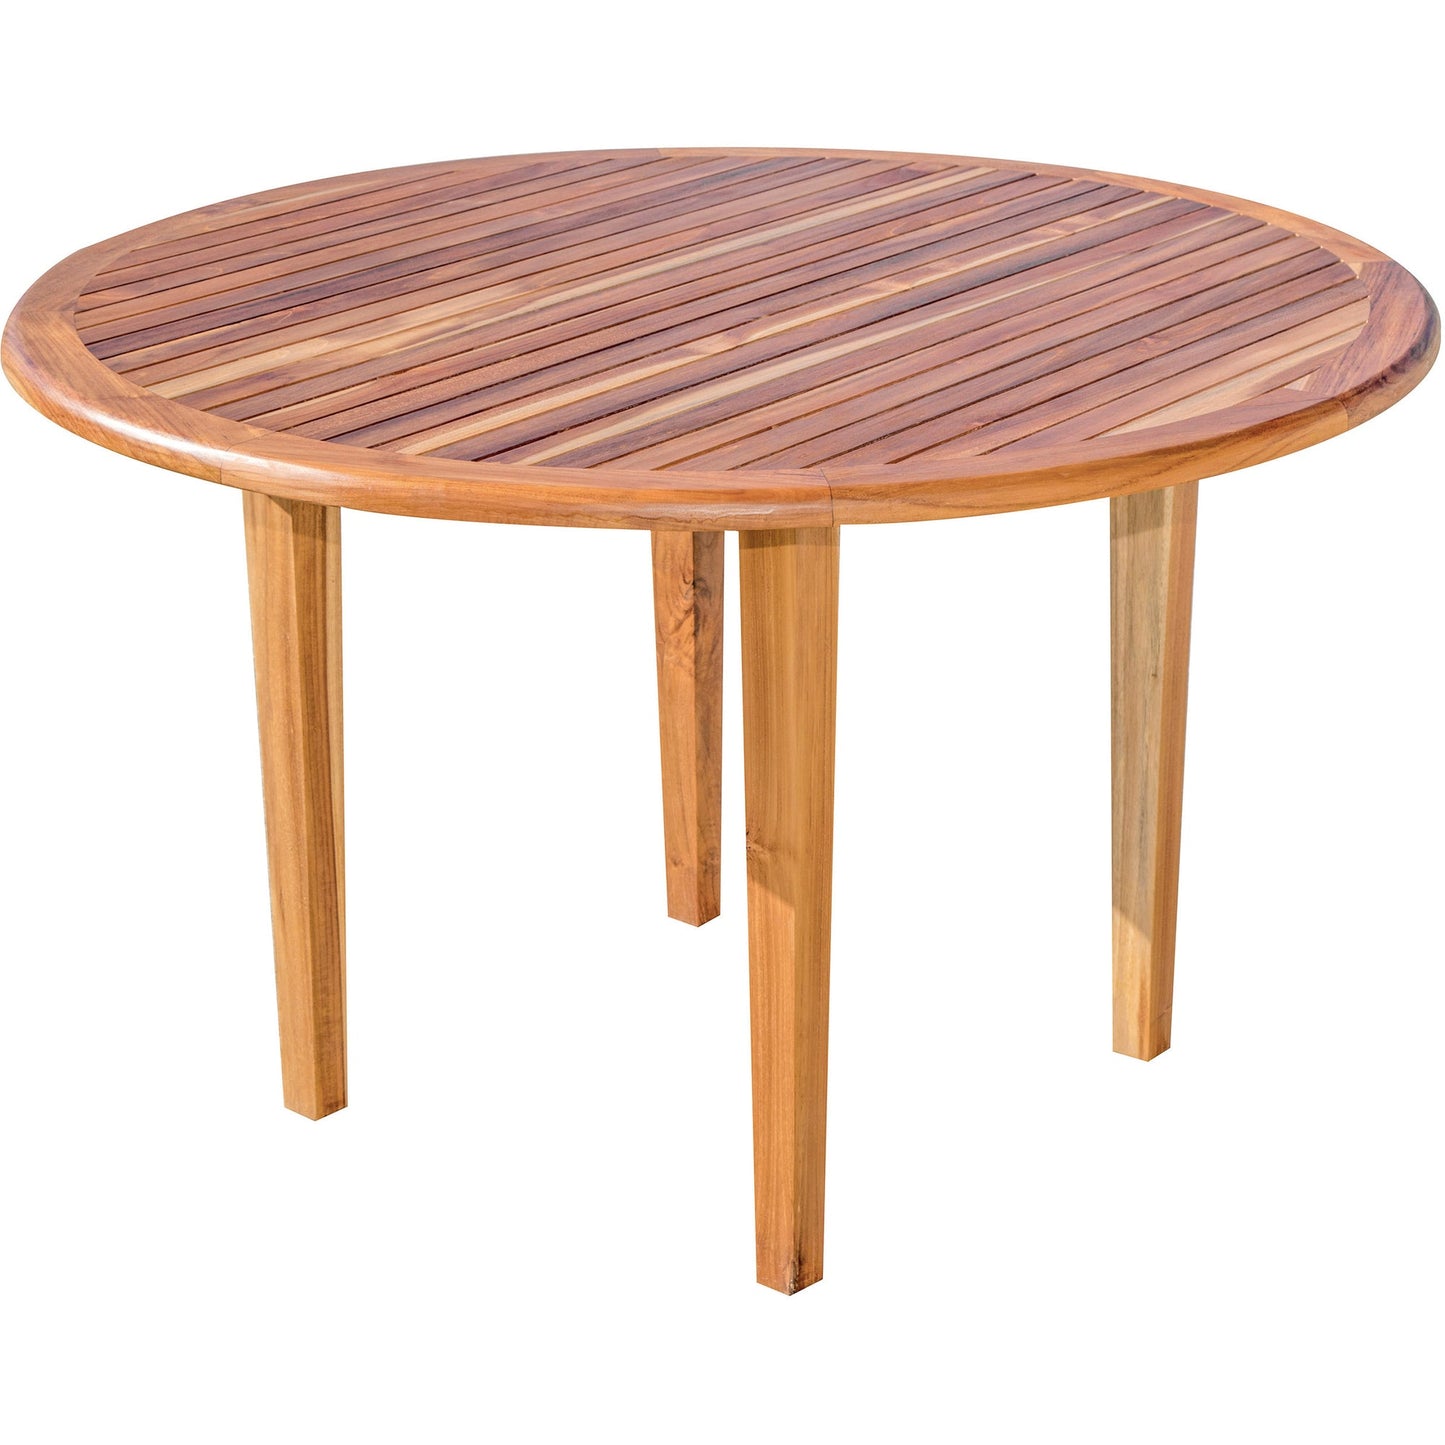 EcoDecors Oasis 48" Solid Teak Wood Round Dining Table in EarthyTeak Finish